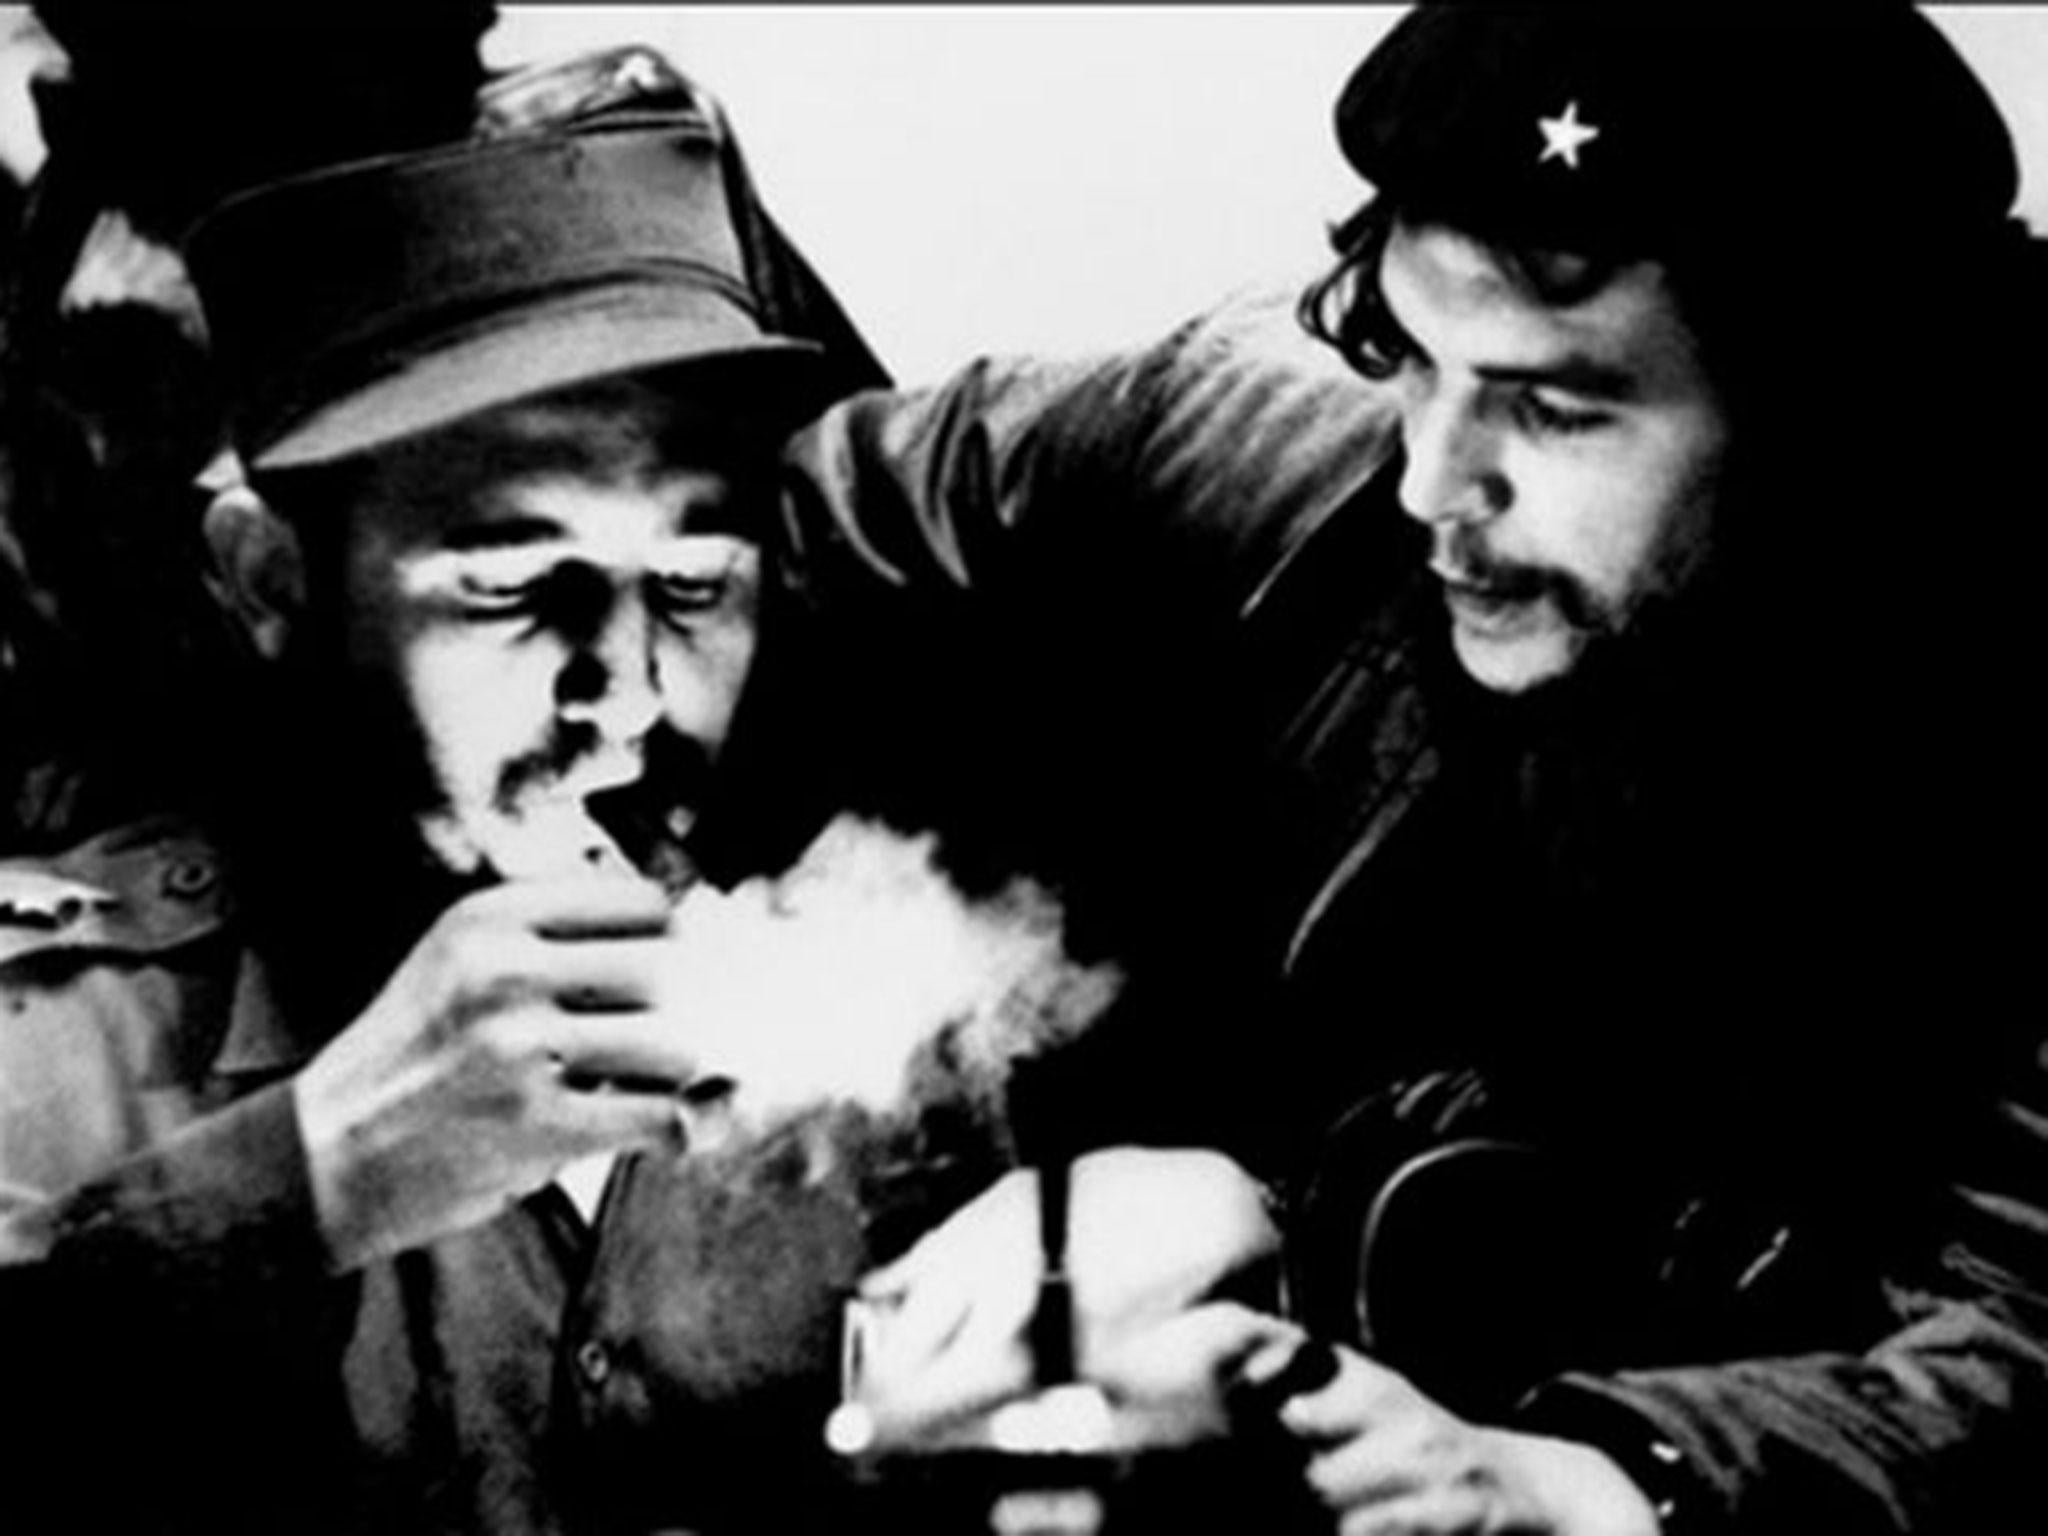 This file photo taken in the 1960s shows then-Cuban prime minister Fidel Castro lighting a cigar while listening to Che Guevara